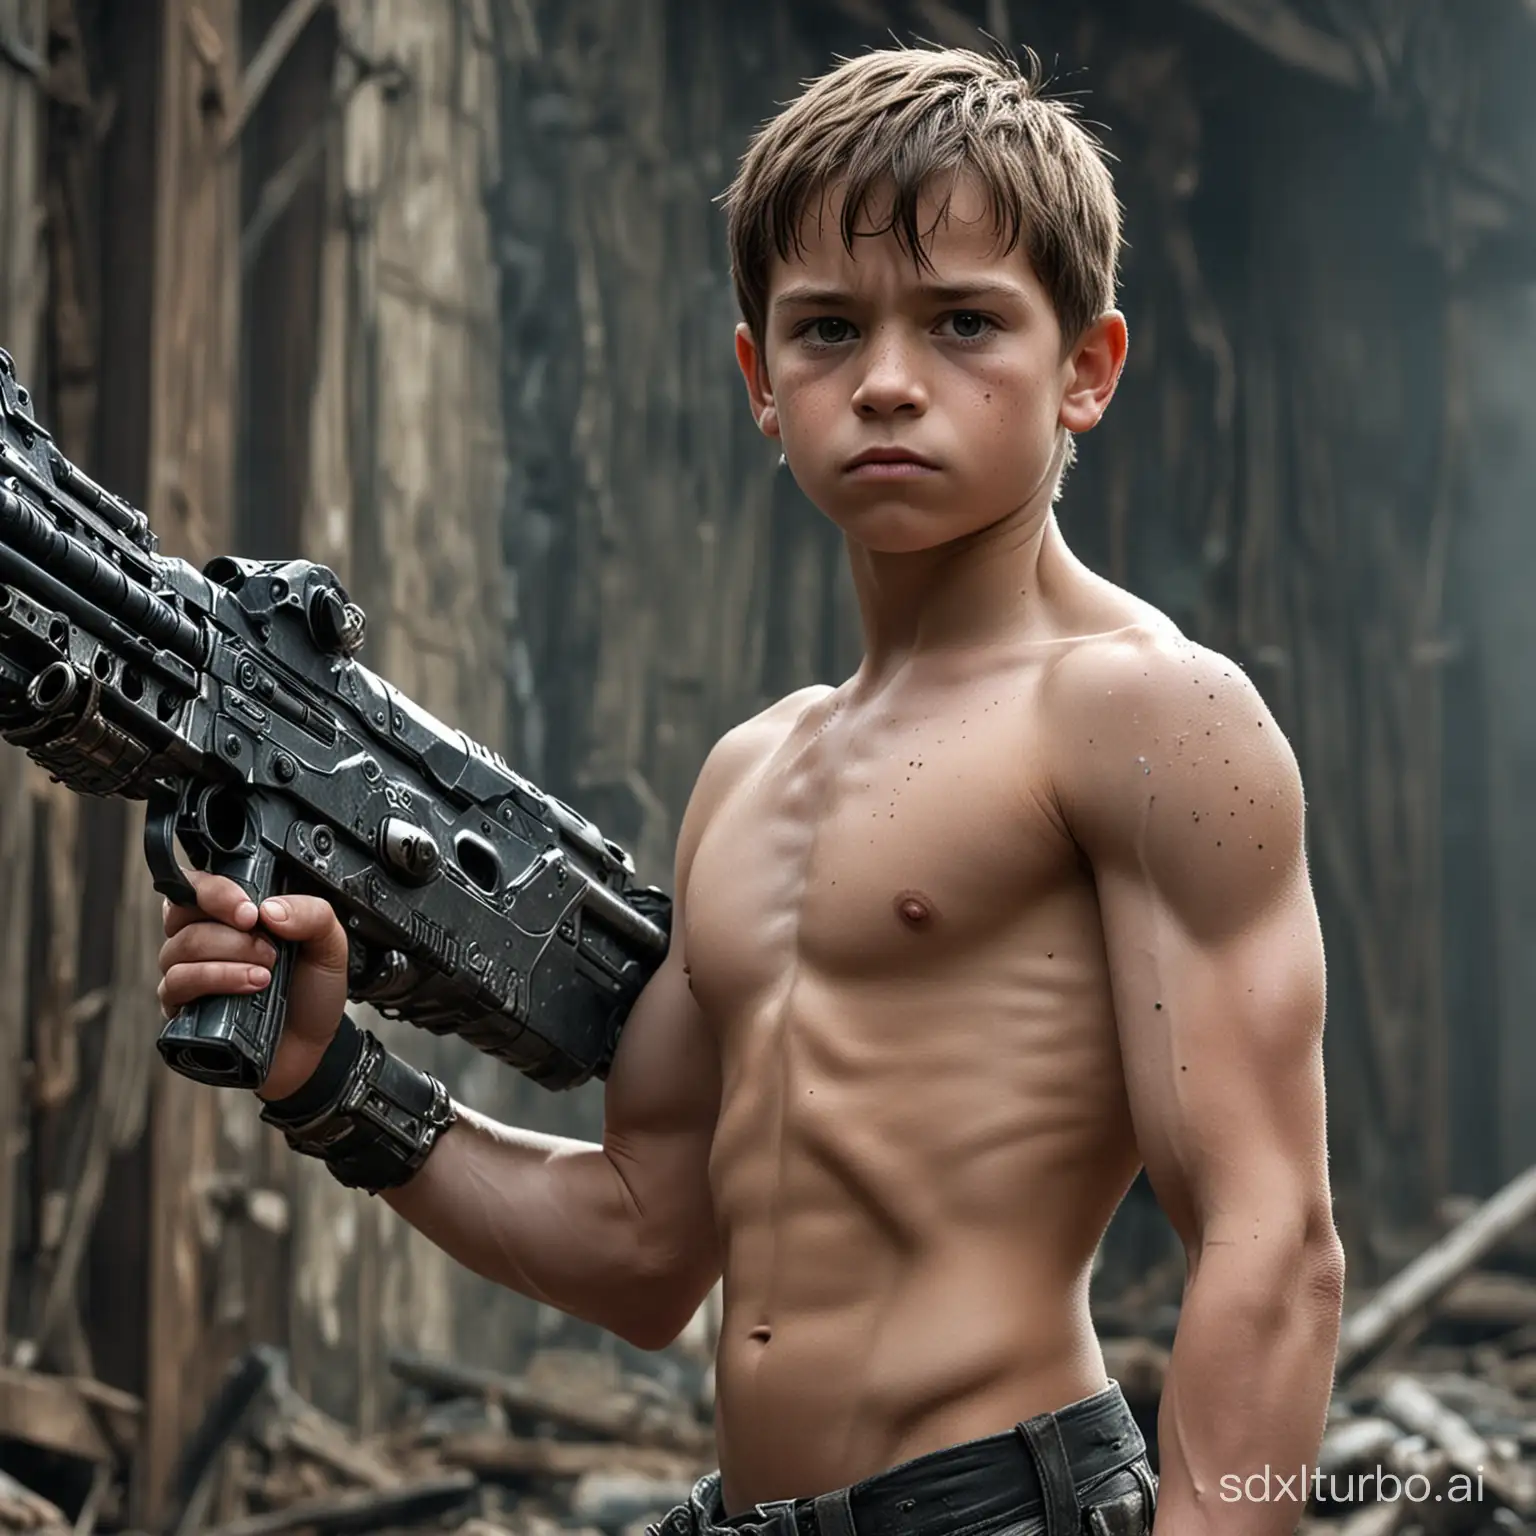 a picture of a muscular shirtless 12 years old bodybuilding huge chest, big muscular arms boy with a gun, preteen, from the tusk movie, still from the movie terminator, movie still of aztec cyborg, in foreground boy with shotgun, still from the movie predator, film still from god of war, movie still of cyborg, unicorn from the tusk movie, movie still of a cyborg, movie still of a cool cyborg, big biceps, big chest, about 1 2 years old, bodybuilding boy, 12 years old kid, shirtless, apocalyptic world, world war 12,desyroyed planet earth, destroyed dark wotld